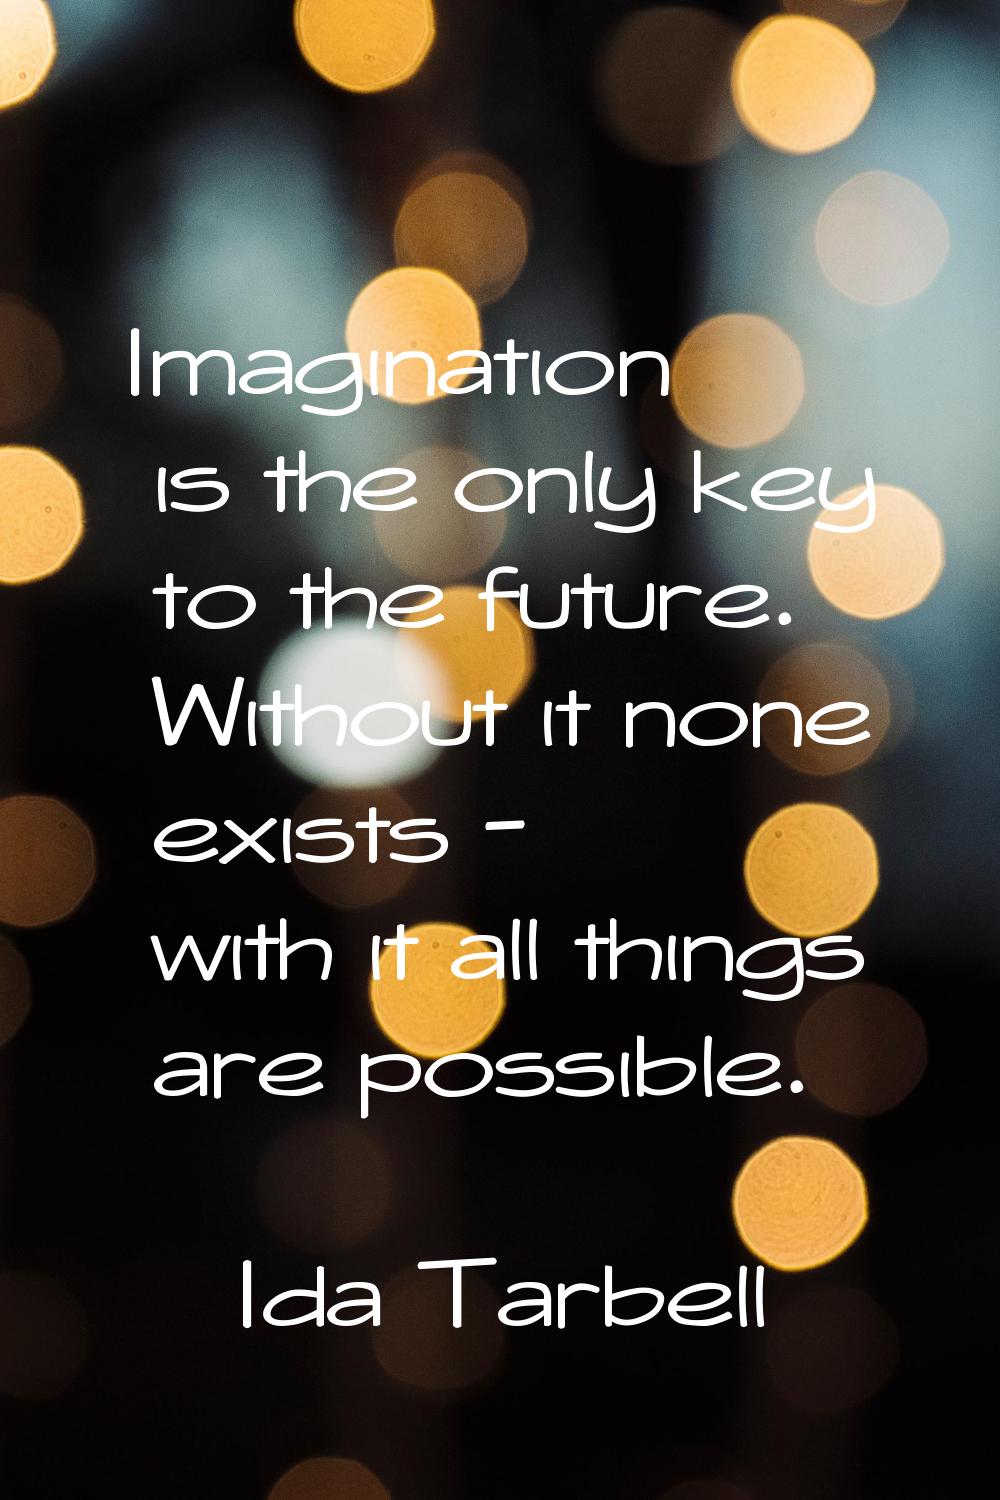 Imagination is the only key to the future. Without it none exists - with it all things are possible